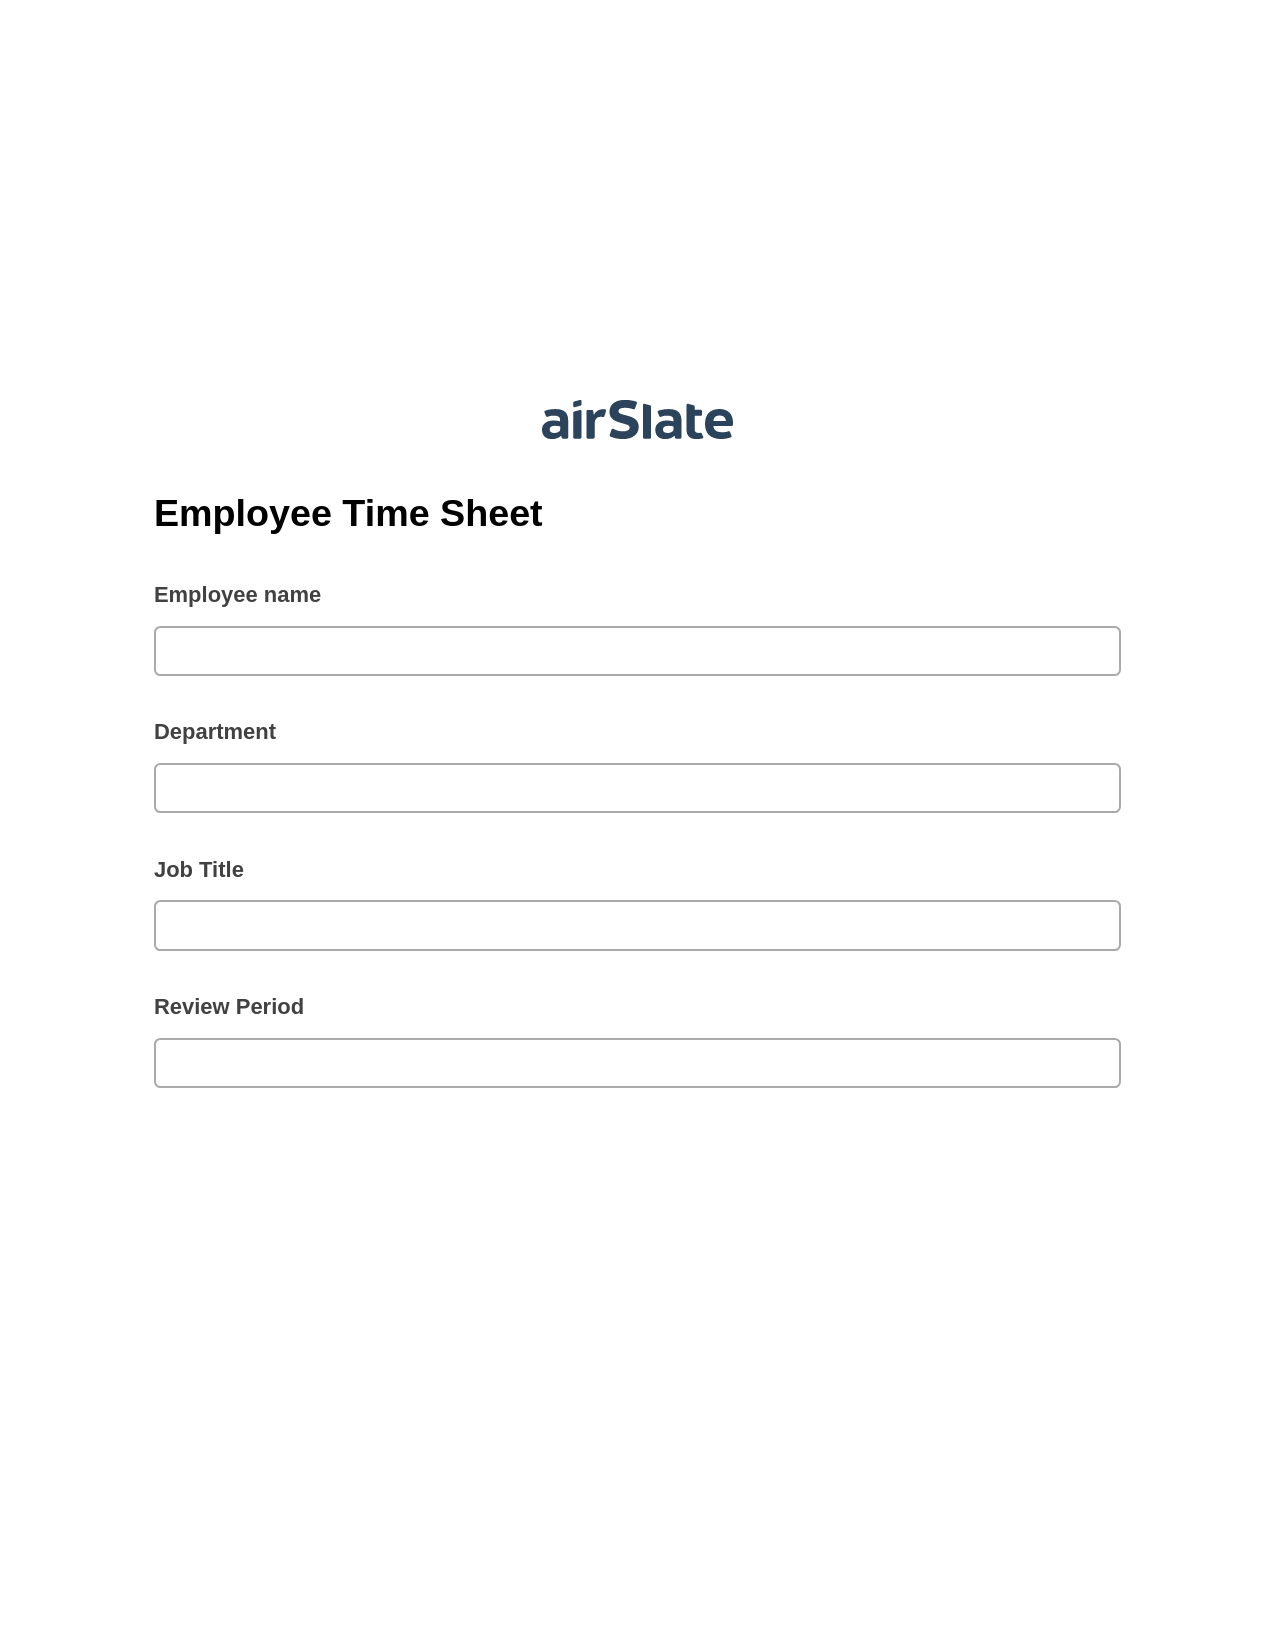 Multirole Employee Time Sheet Pre-fill from Salesforce Records with SOQL Bot, Update Audit Trail Bot, Export to NetSuite Bot